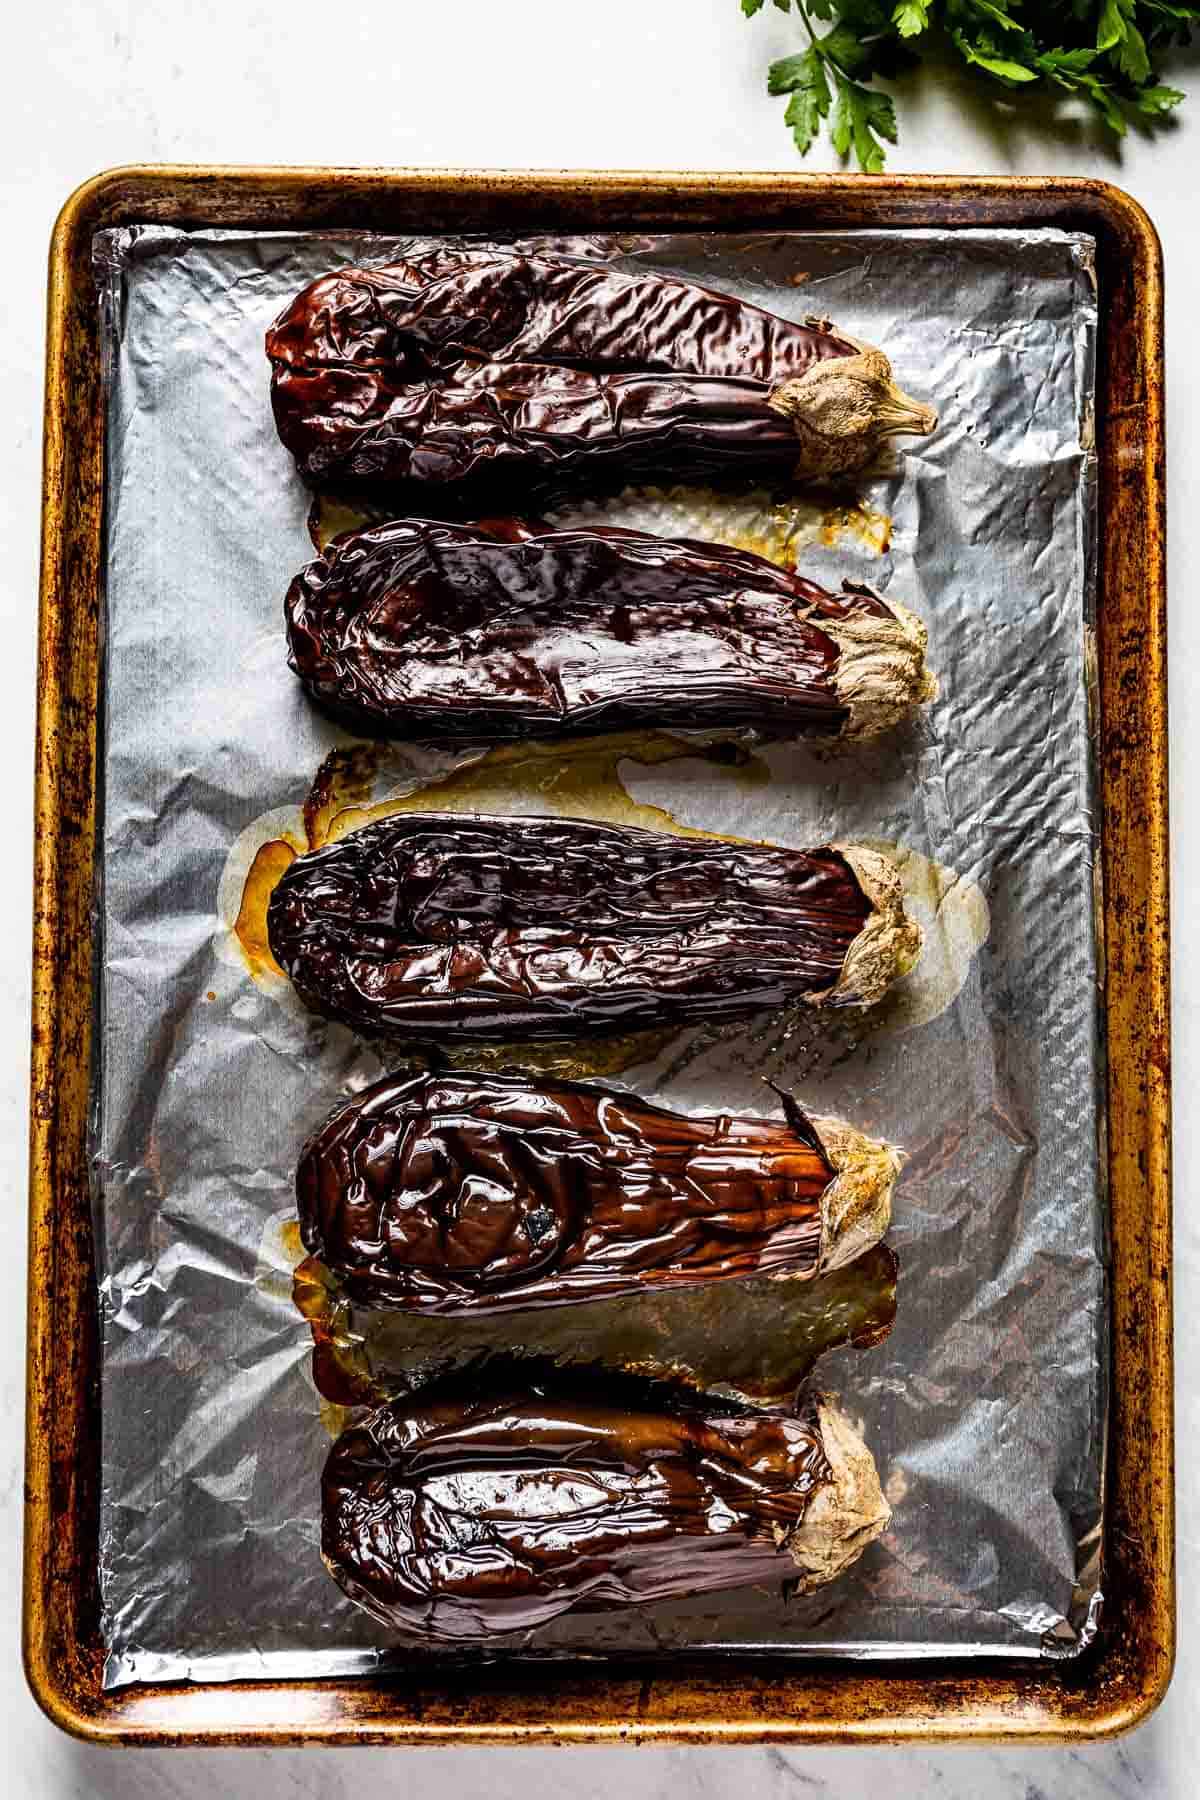 Whole roasted aubergine on a baking sheet from top view